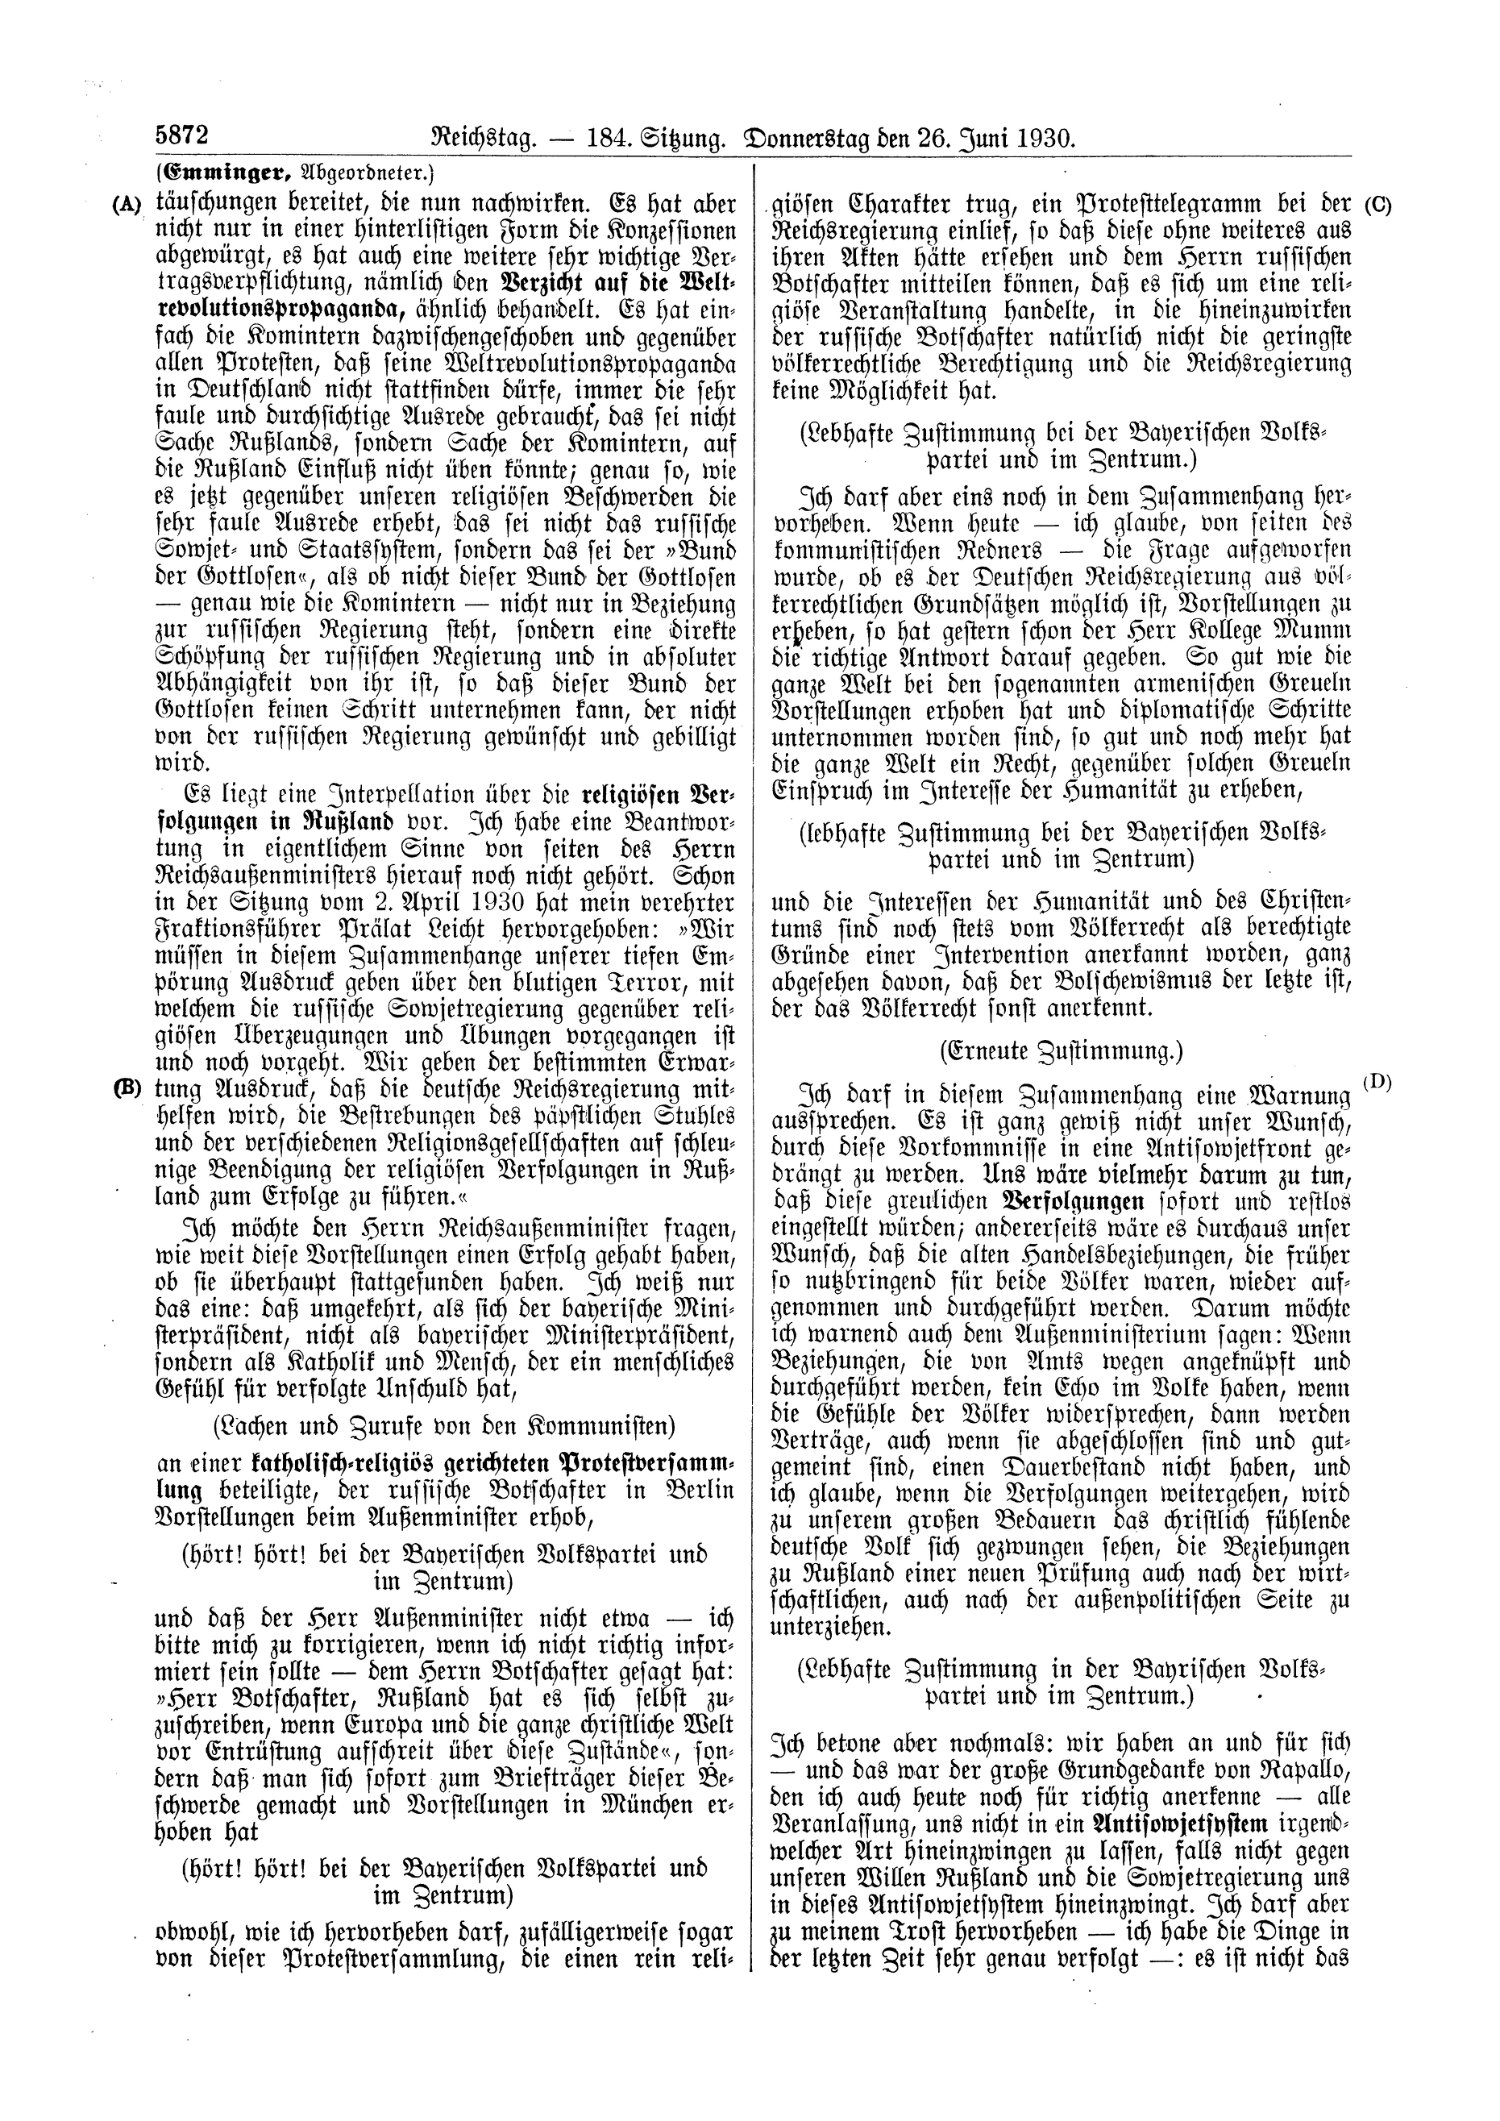 Scan of page 5872